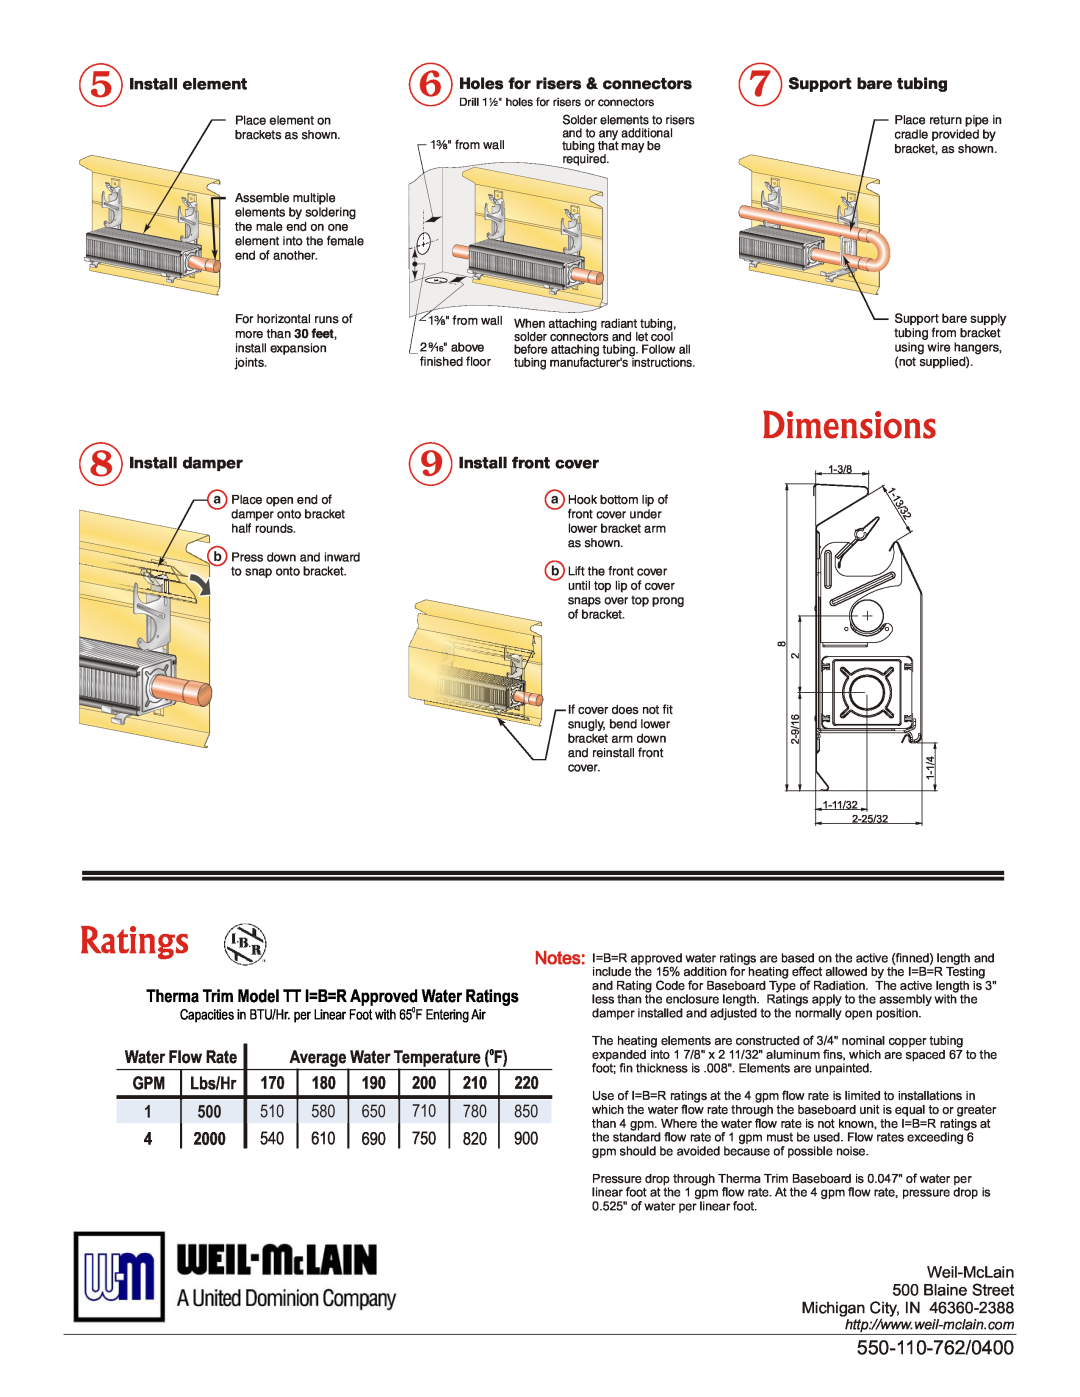 Weil-McLain Electric Baseboard Heater manual Ratings, Dimensions, 550-110-762/0400 